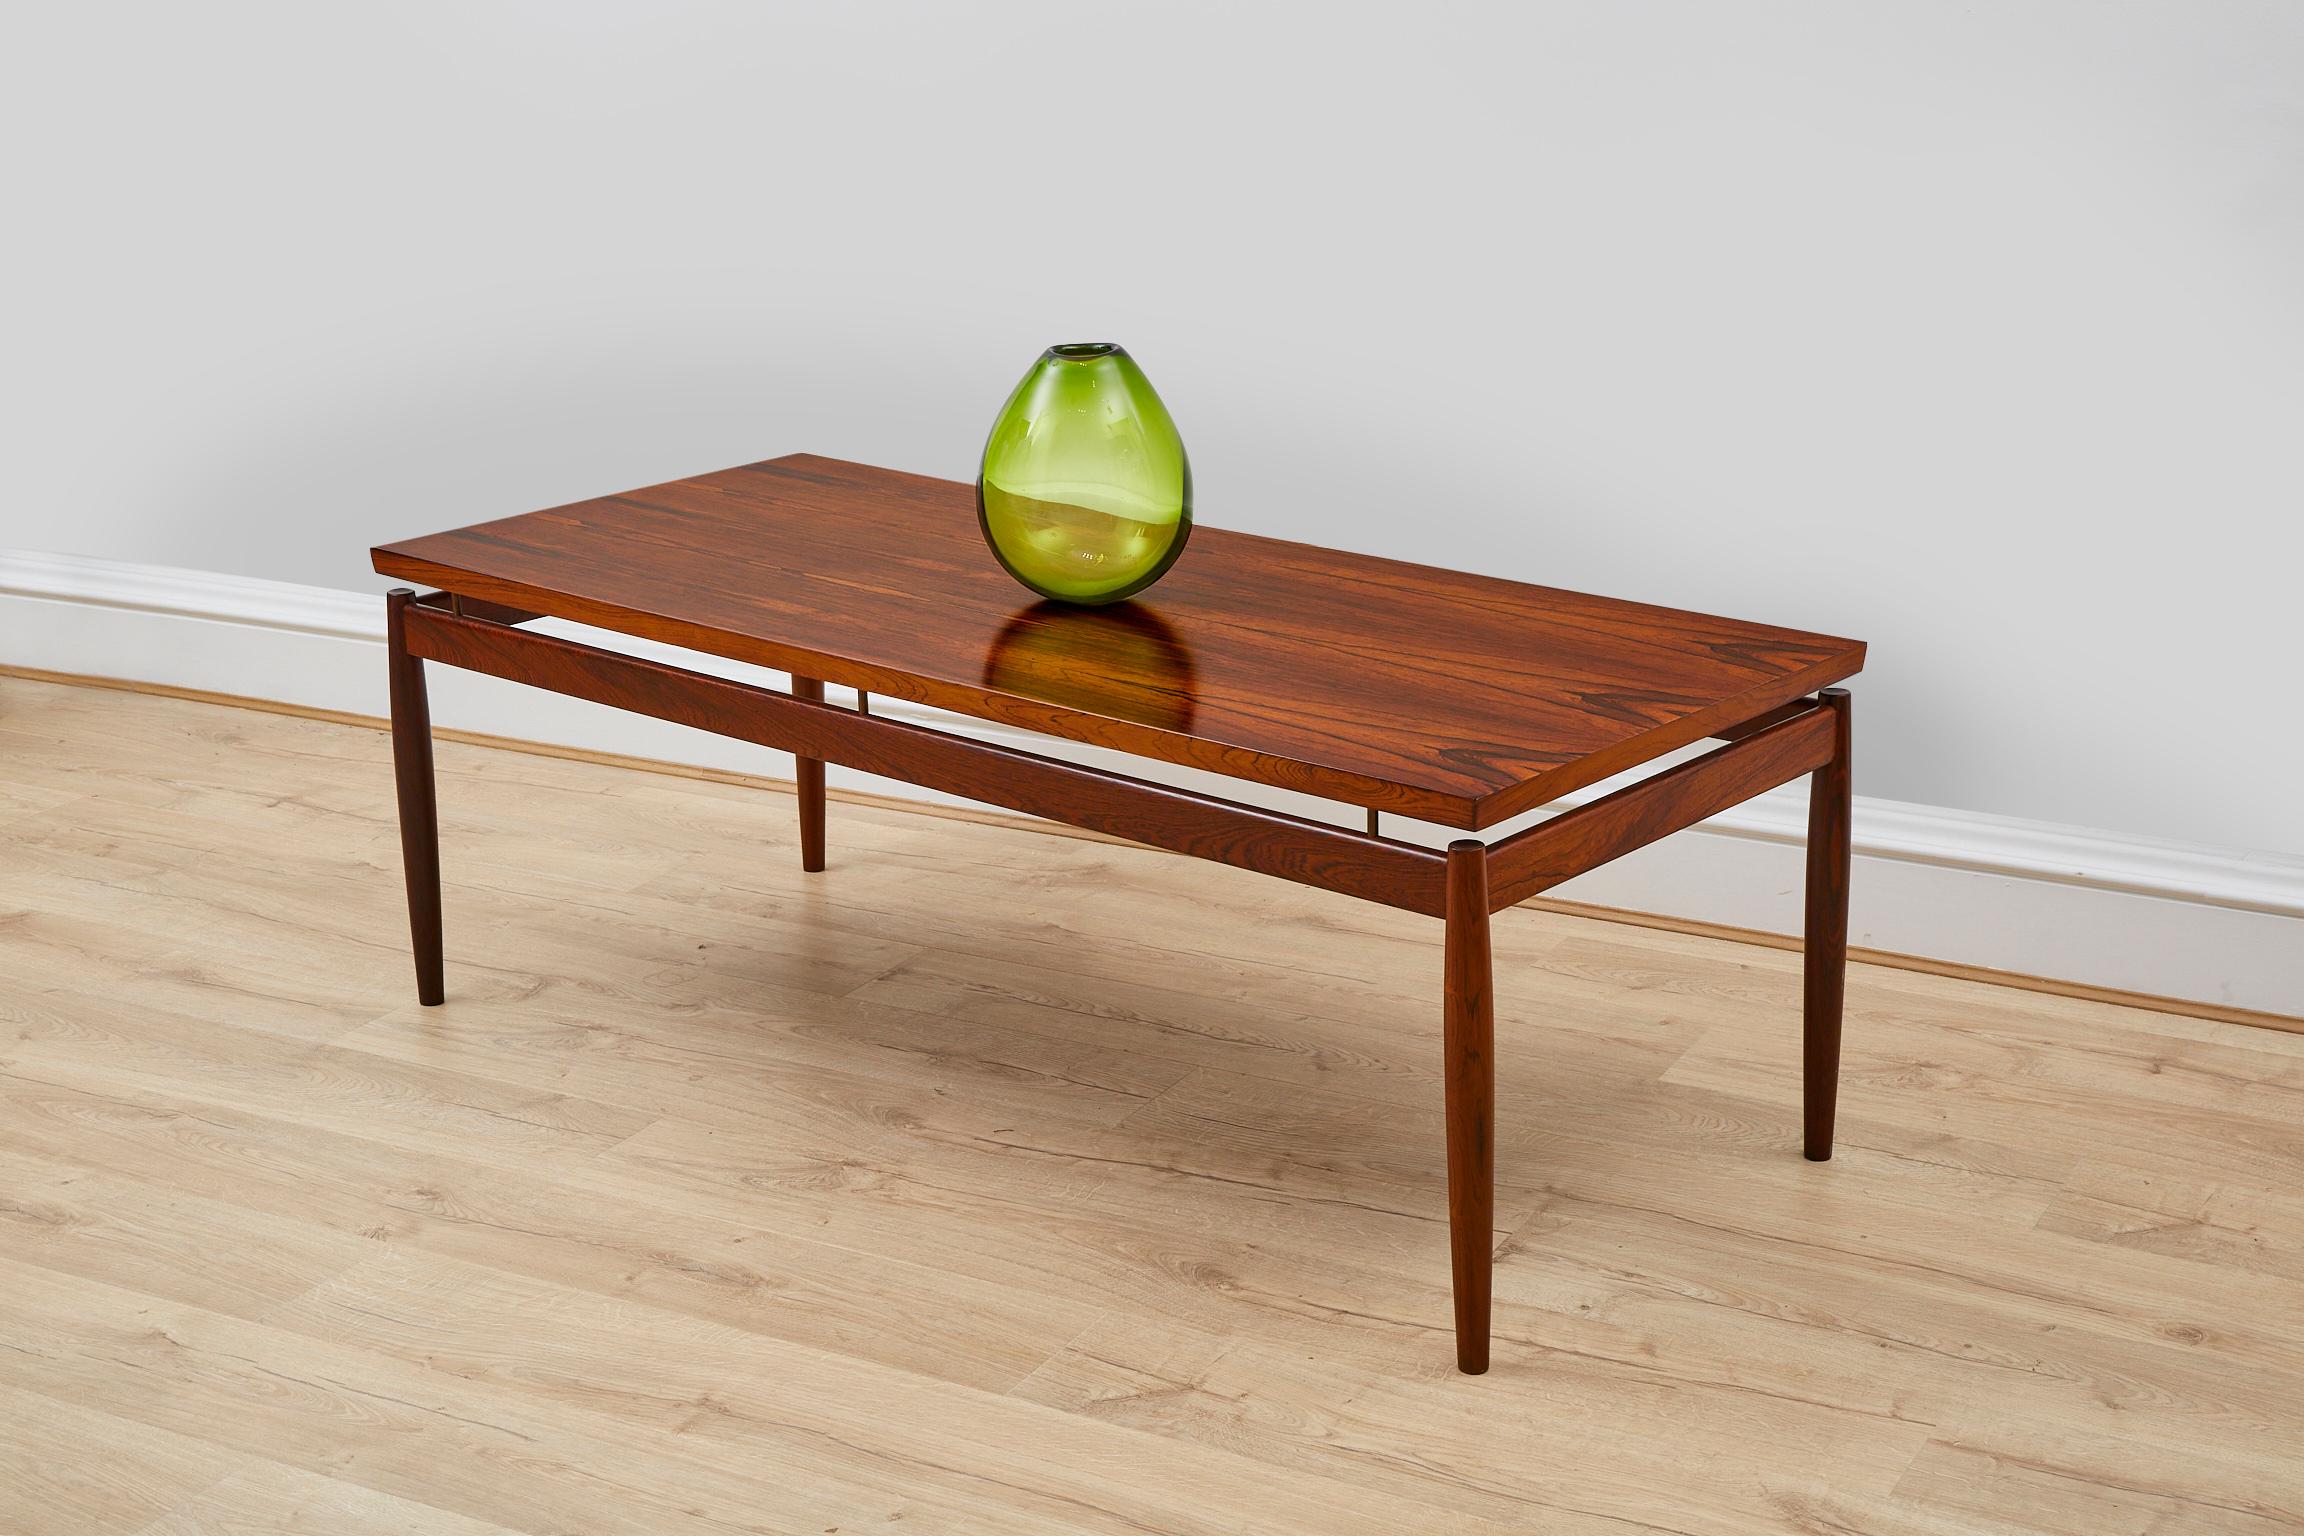 Beautiful and extremely rare rosewood coffee table designed by Grete Jalk for France & Son in the 1960s. 

About the Designer 
Grete Jalk

Recognized as an important Danish modernist designer—working at a time when women were a rarity in the design